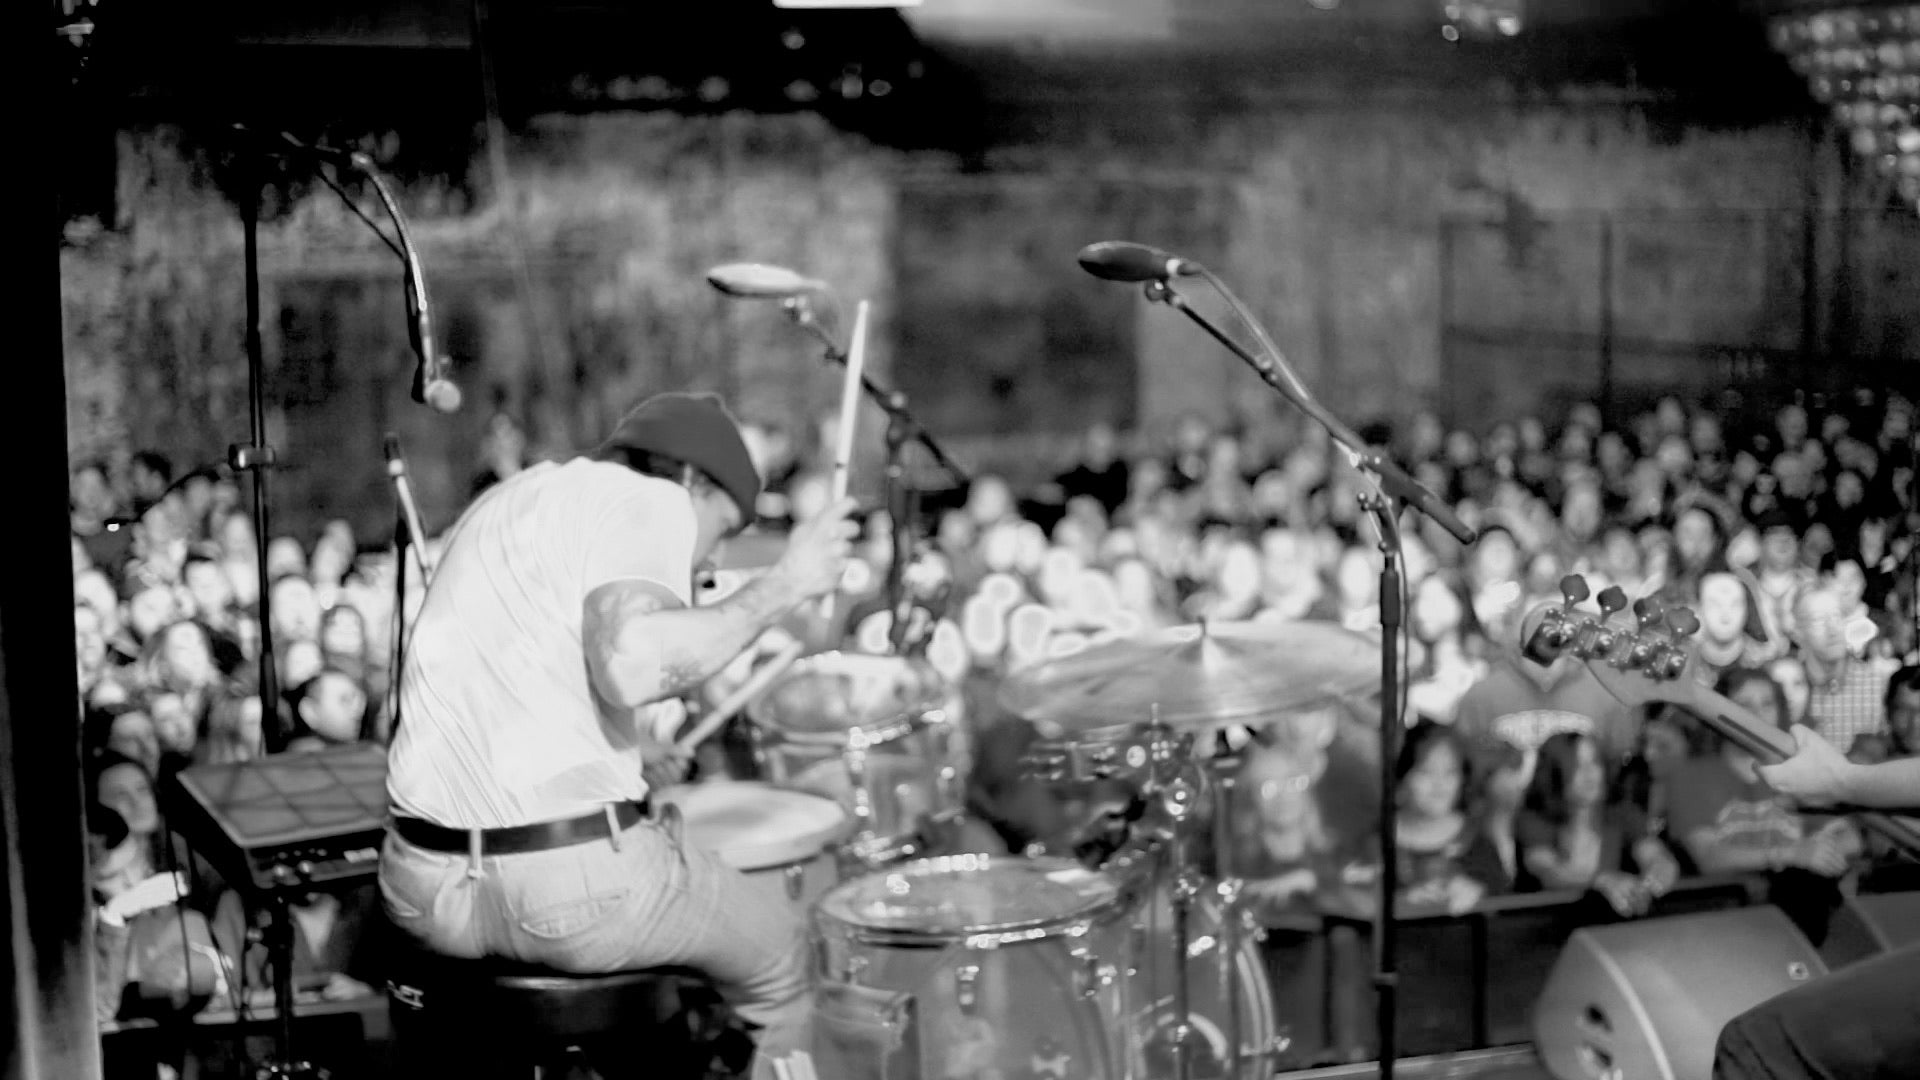 black and white image of drummer with crowd in the background